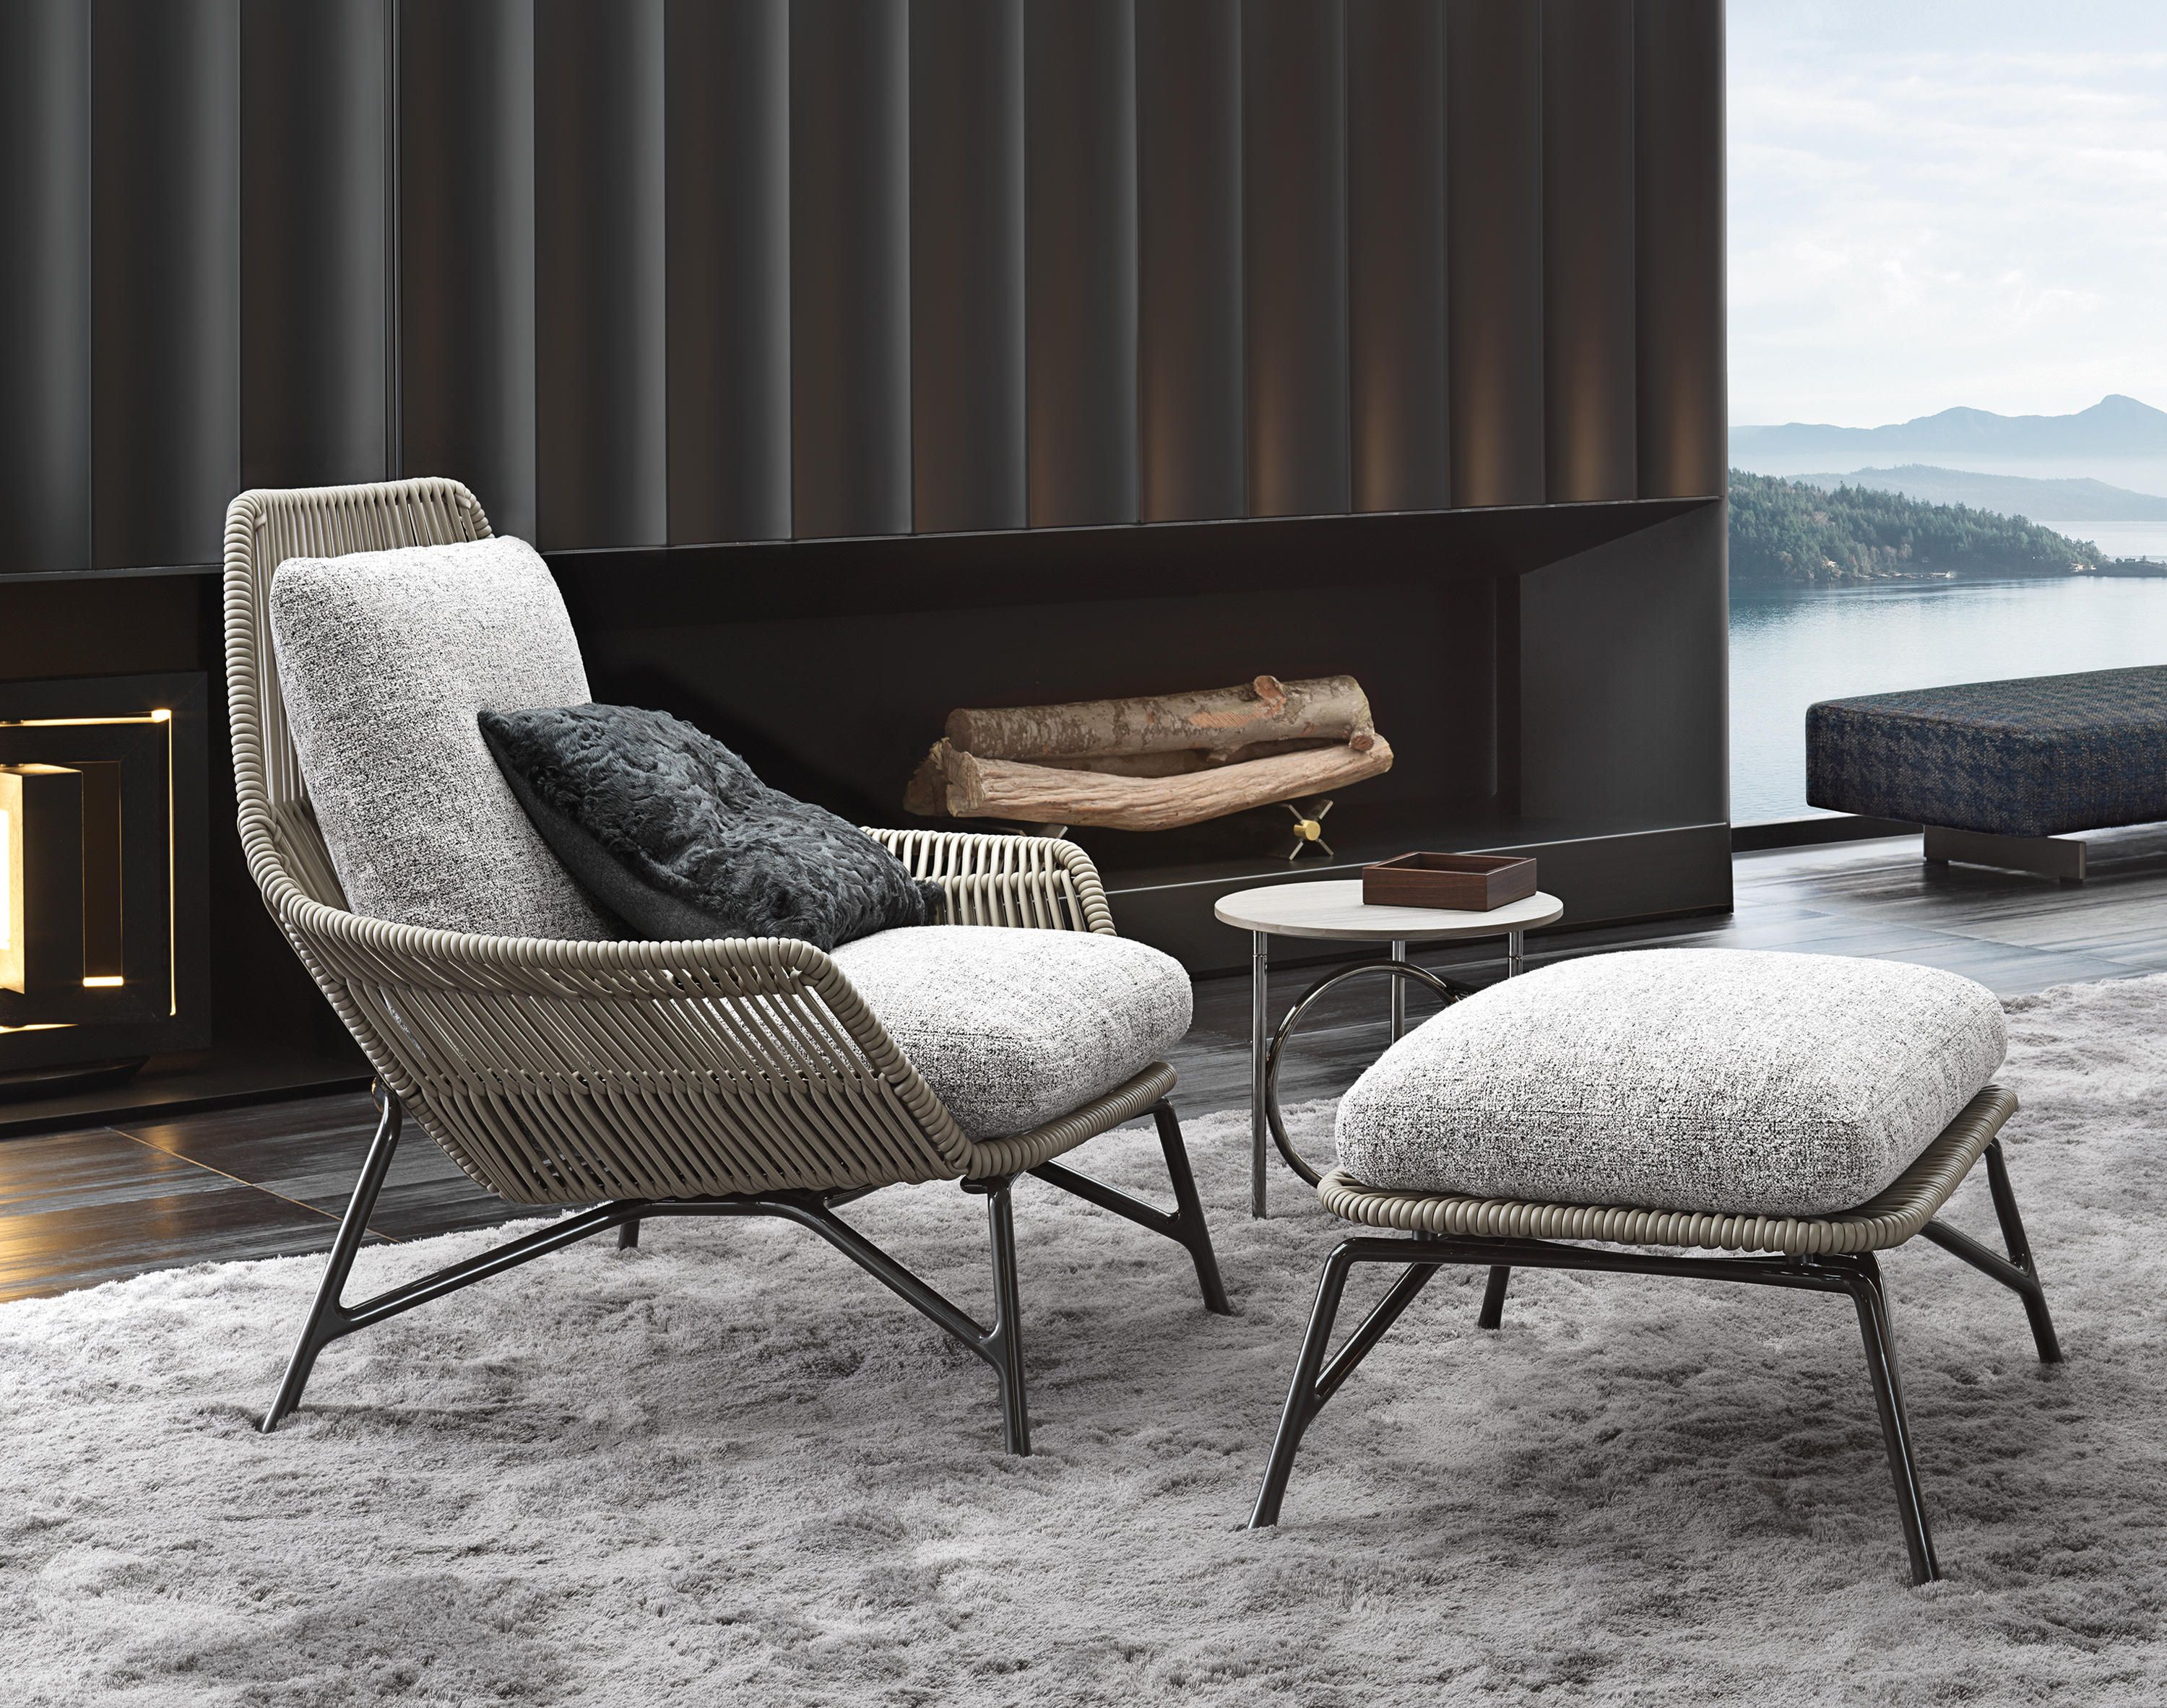 Outdoor chair PRINCE CORD by Minotti